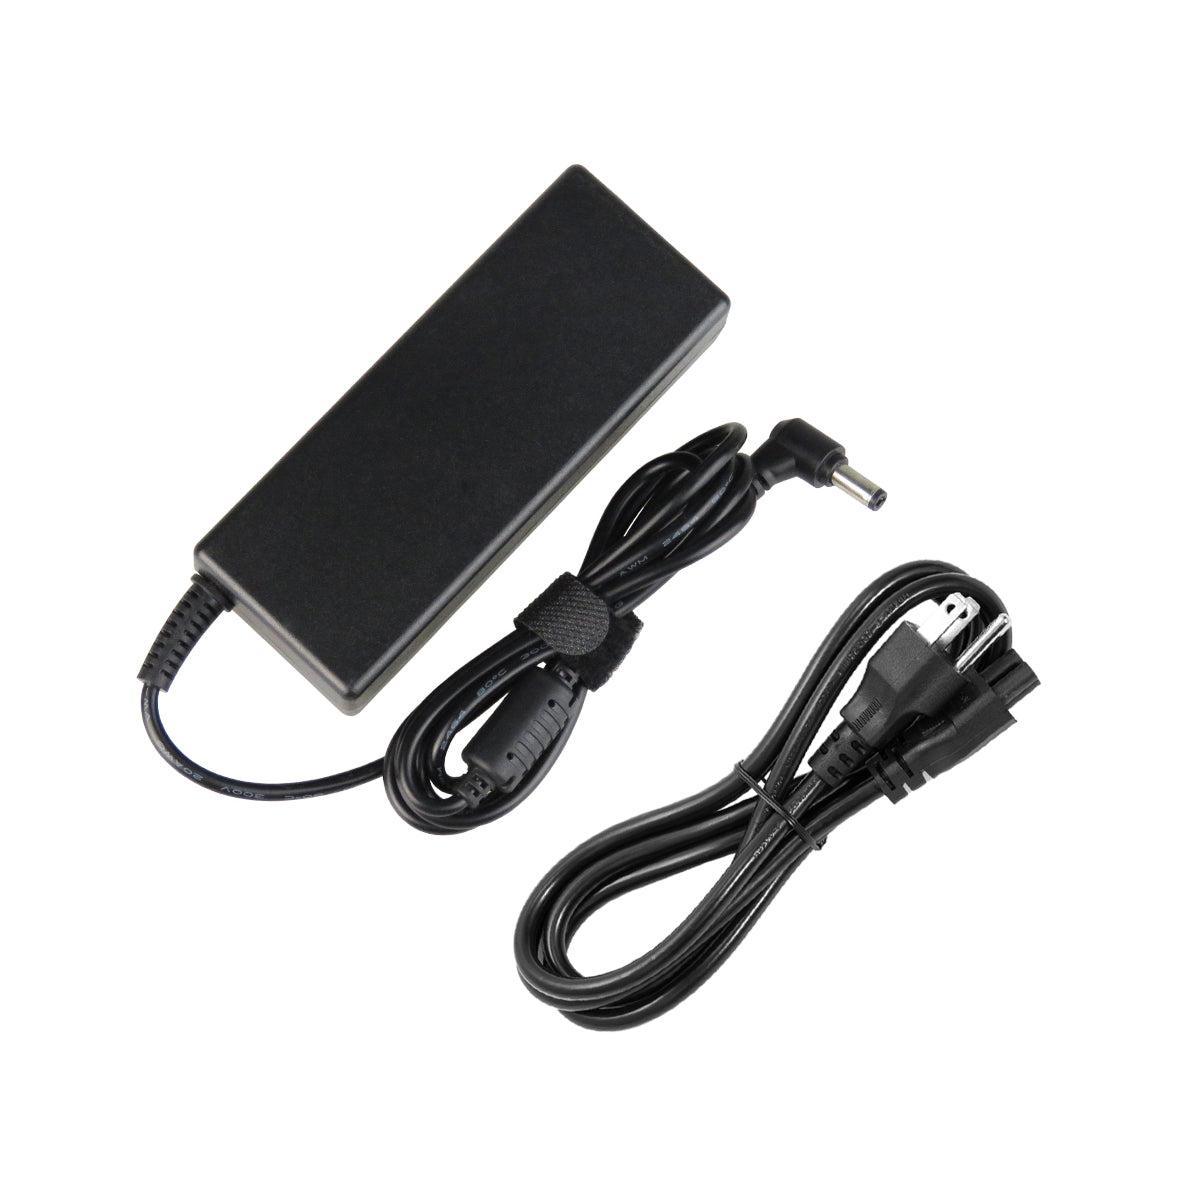 AC Adapter Charger for ASUS X551CA Series Notebook.